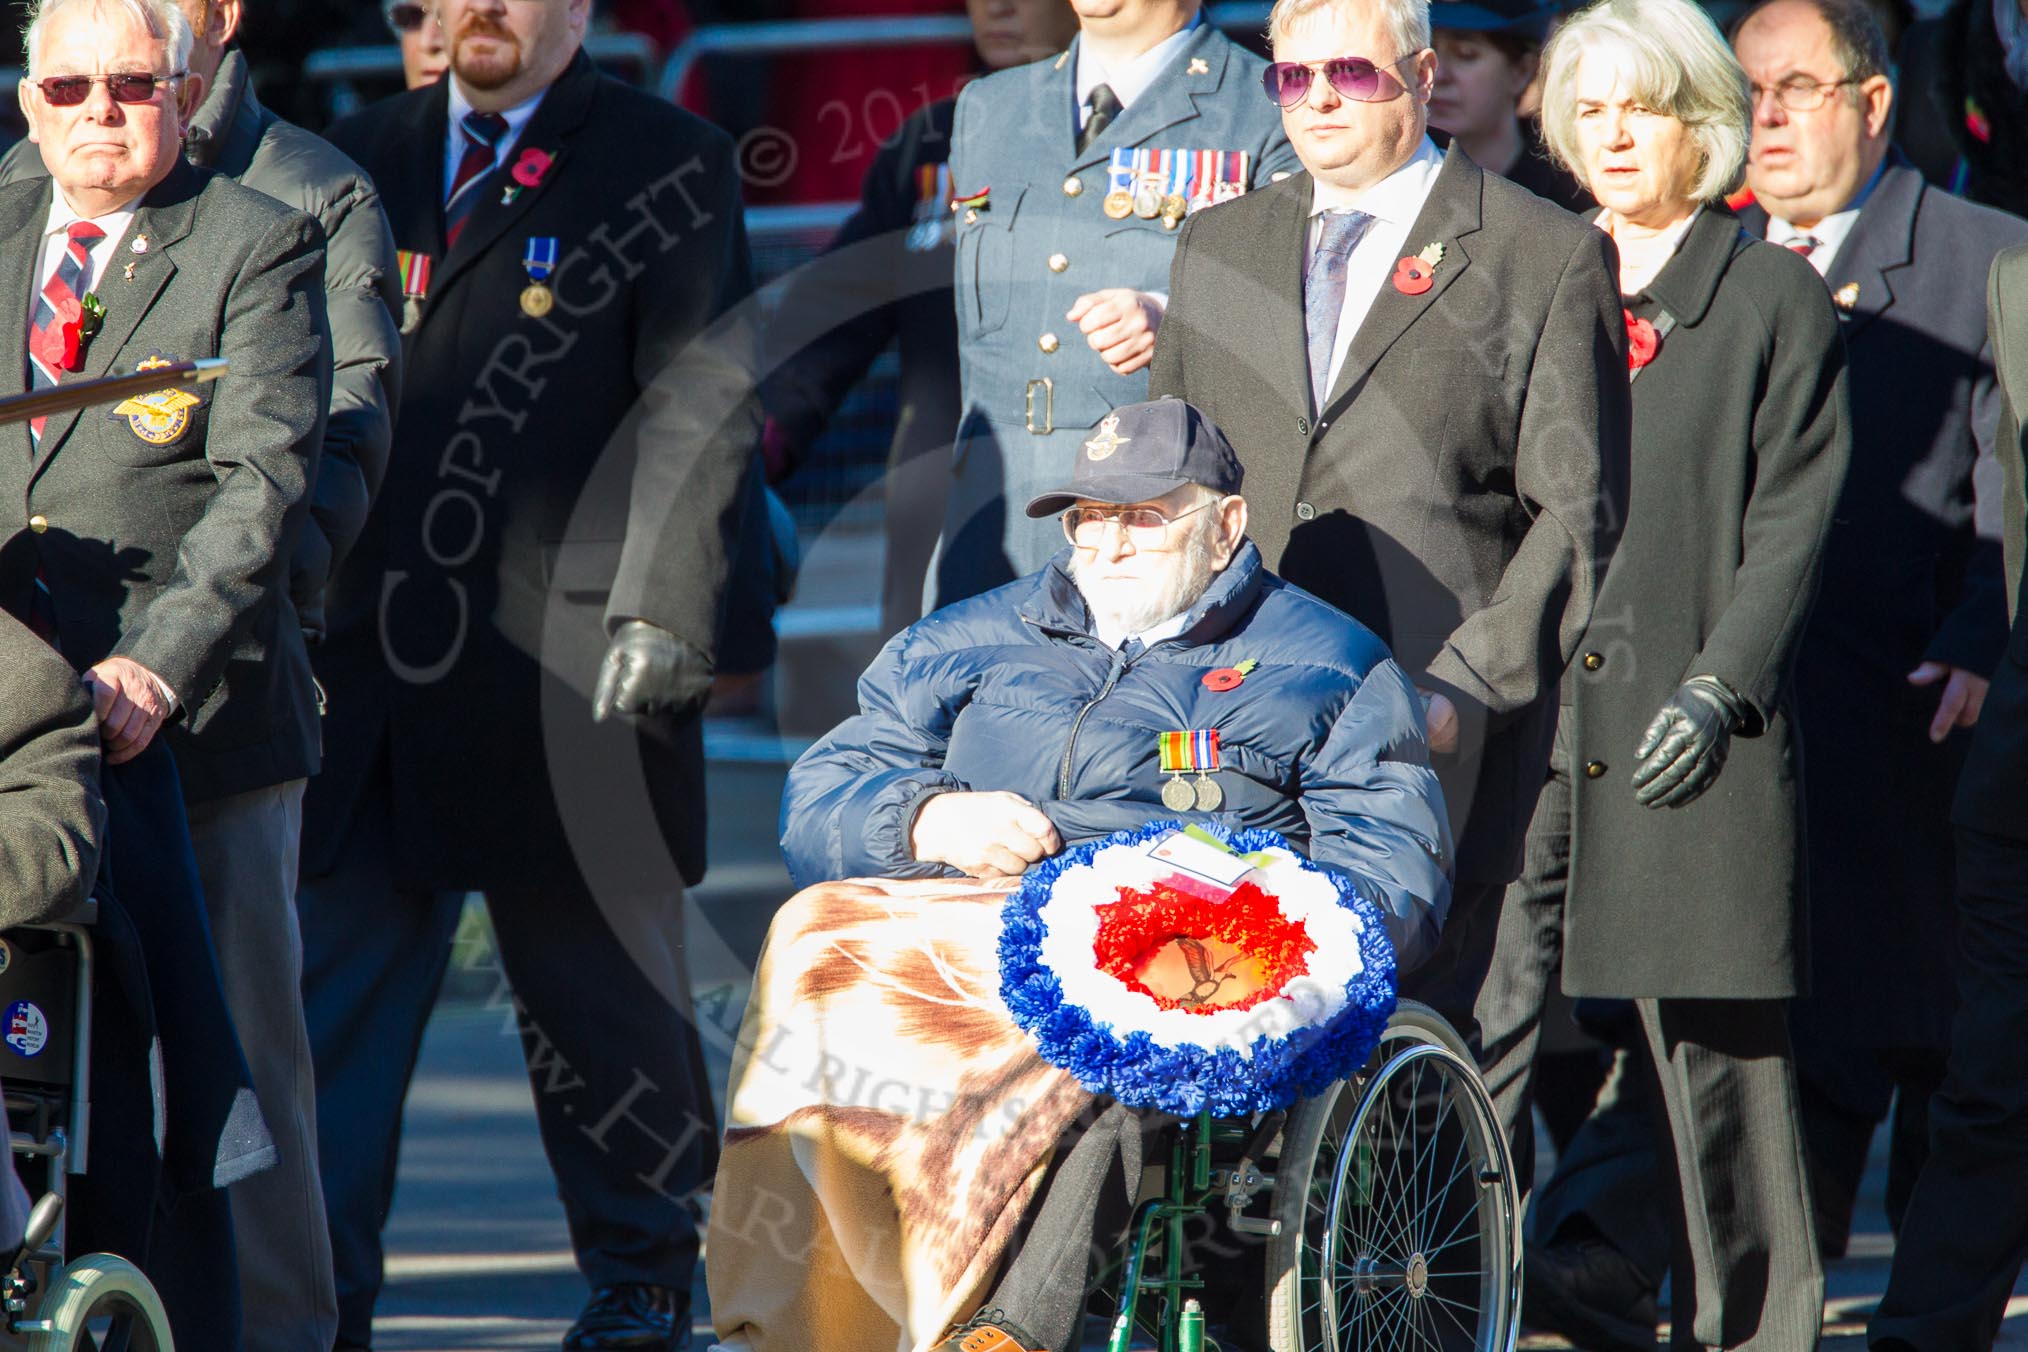 Remembrance Sunday Cenotaph March Past 2013: C1 - Royal Air Forces Association..
Press stand opposite the Foreign Office building, Whitehall, London SW1,
London,
Greater London,
United Kingdom,
on 10 November 2013 at 12:05, image #1652